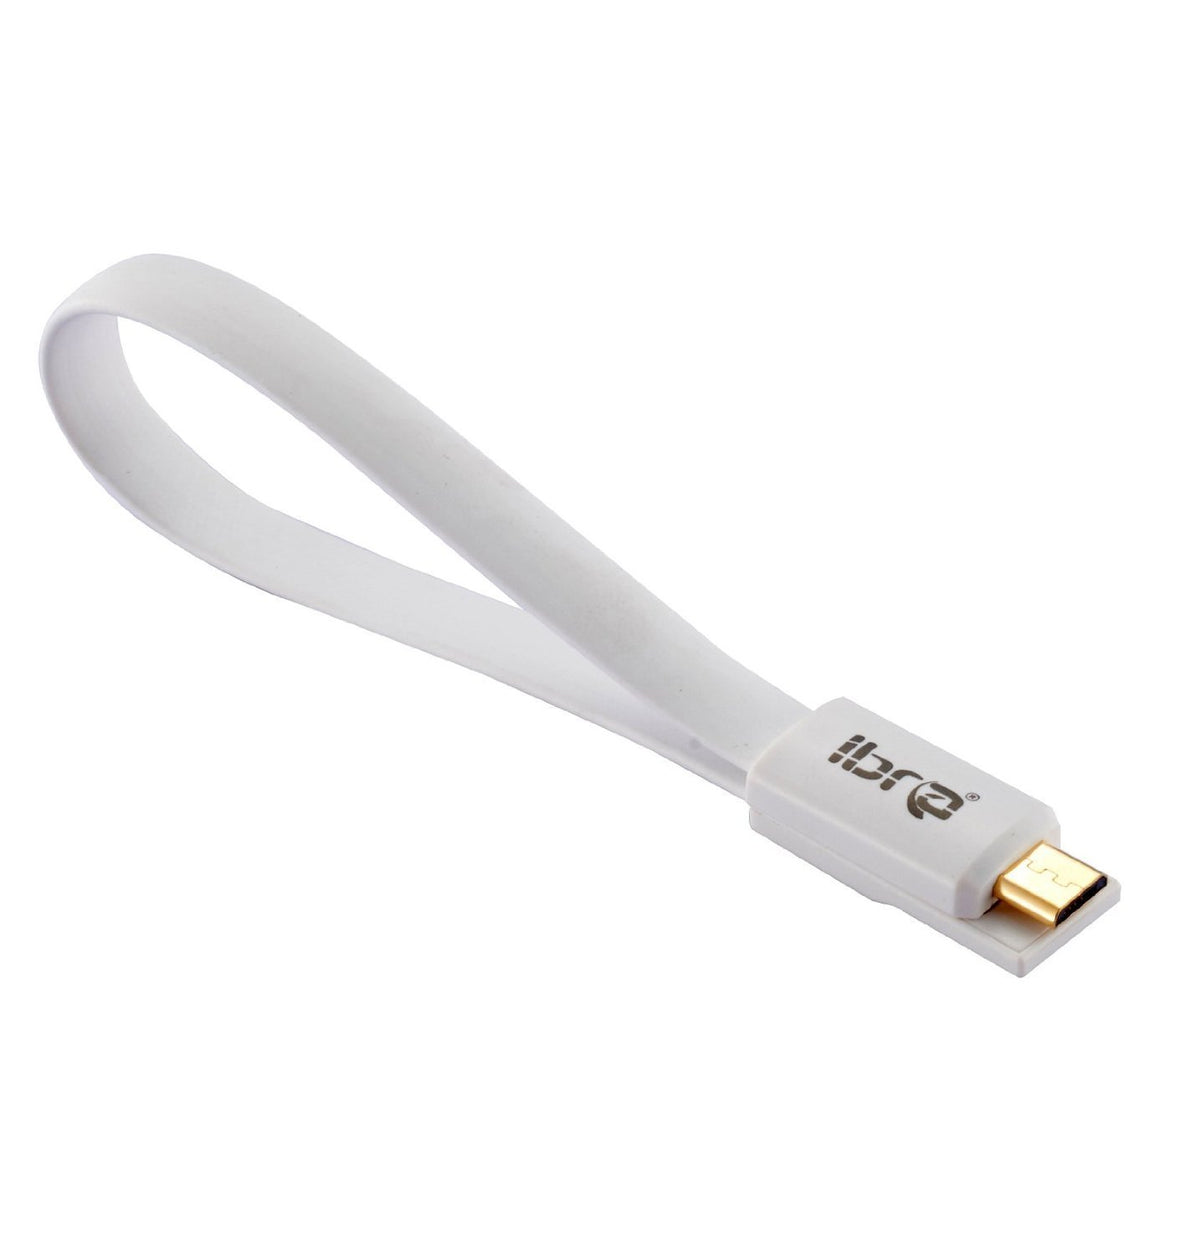 IBRA 0.2M Magnet Short and Compact Micro USB Charging/Sync Data Cable for for Samsung Galaxy S4 i9500 i9300 N7100 Nokia HTC Sony Xperia Series and all Mobilephones/Tablets/Cameras/Sat Nav -7.5Inch - White